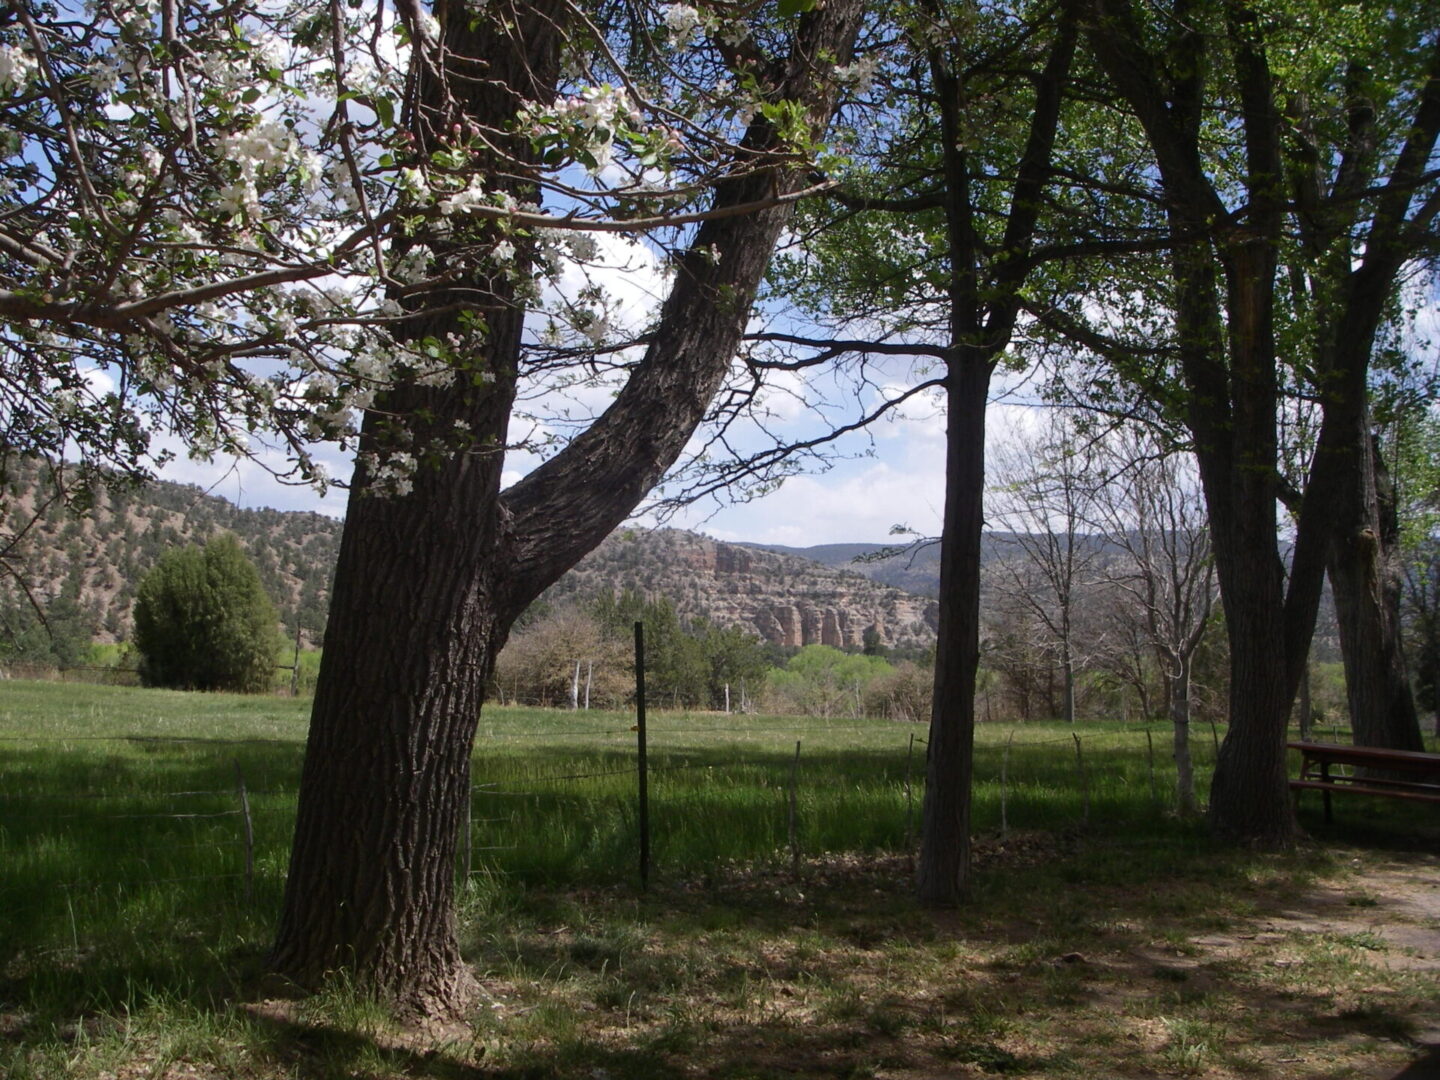 A view of trees and grass in the distance.